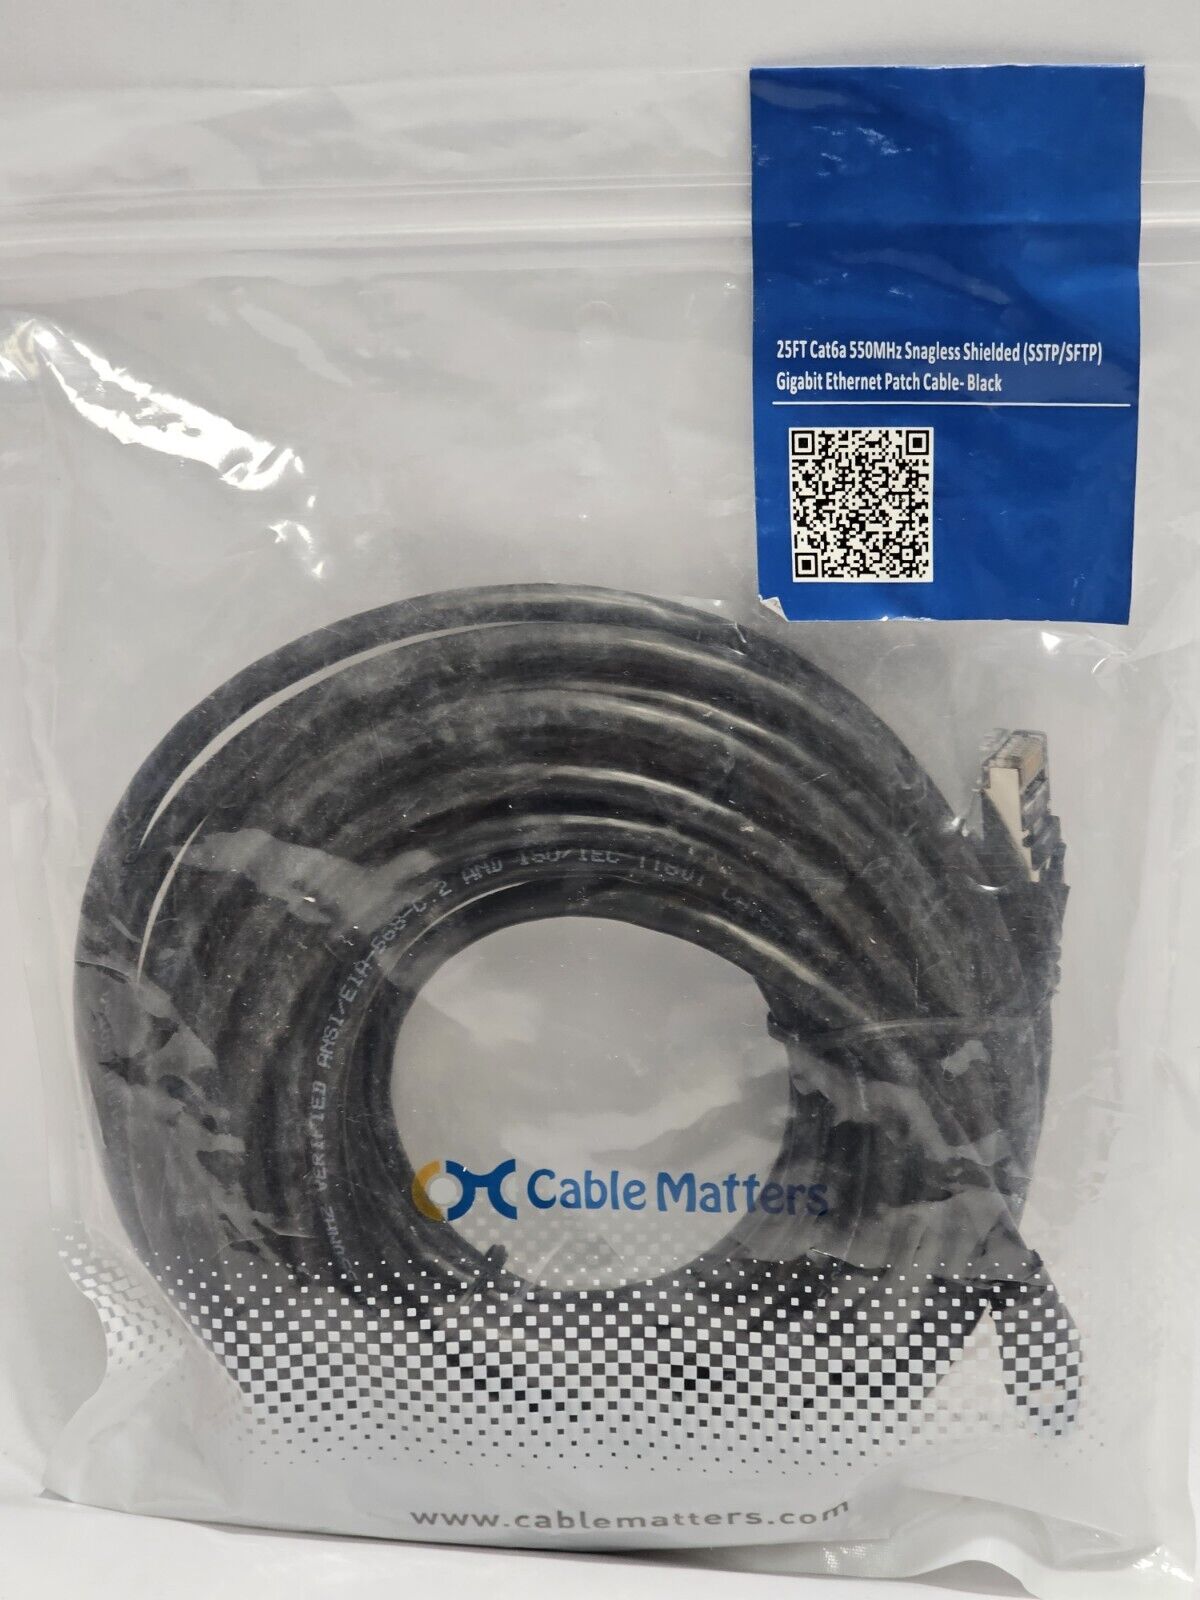 CABLE MATTERS 25FT CAT6a 550MHz SNAGLESS SHIELDED (SSTP/SFTP GIRABIT EATHERNET P